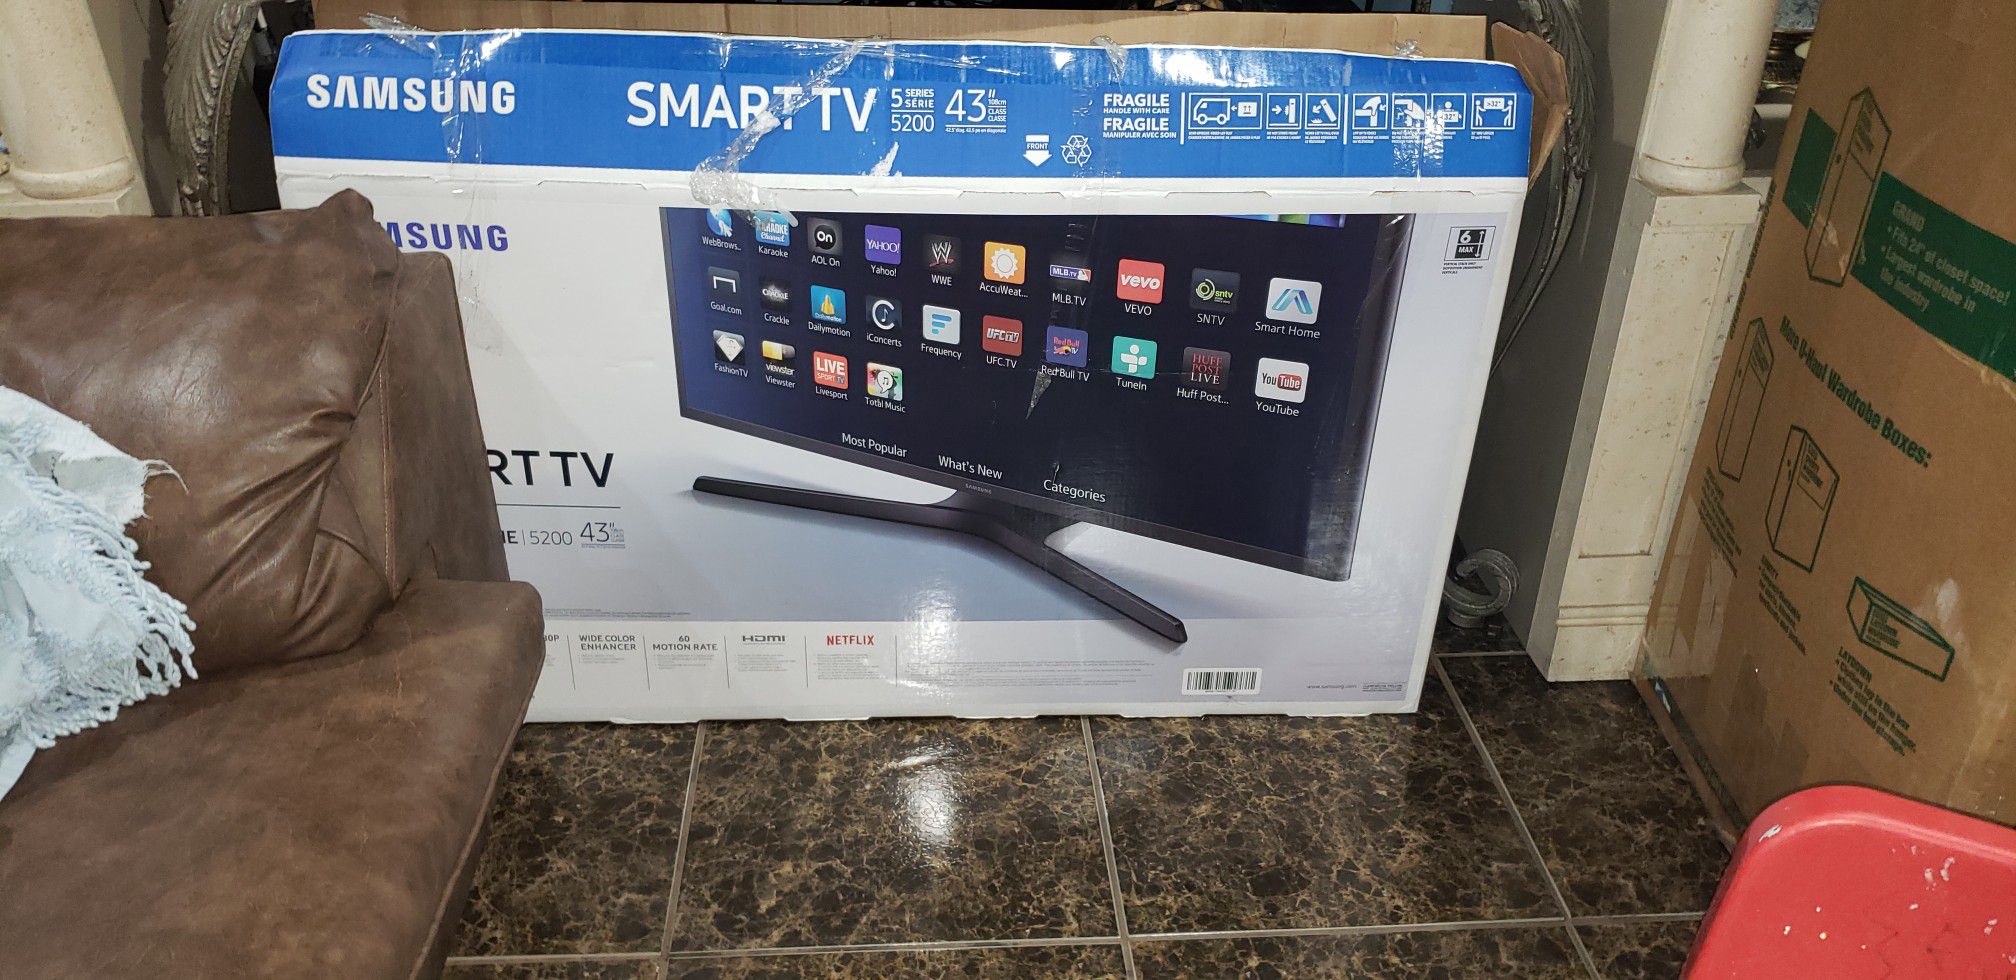 60 inch television samsung not SMART tv but in good working condition